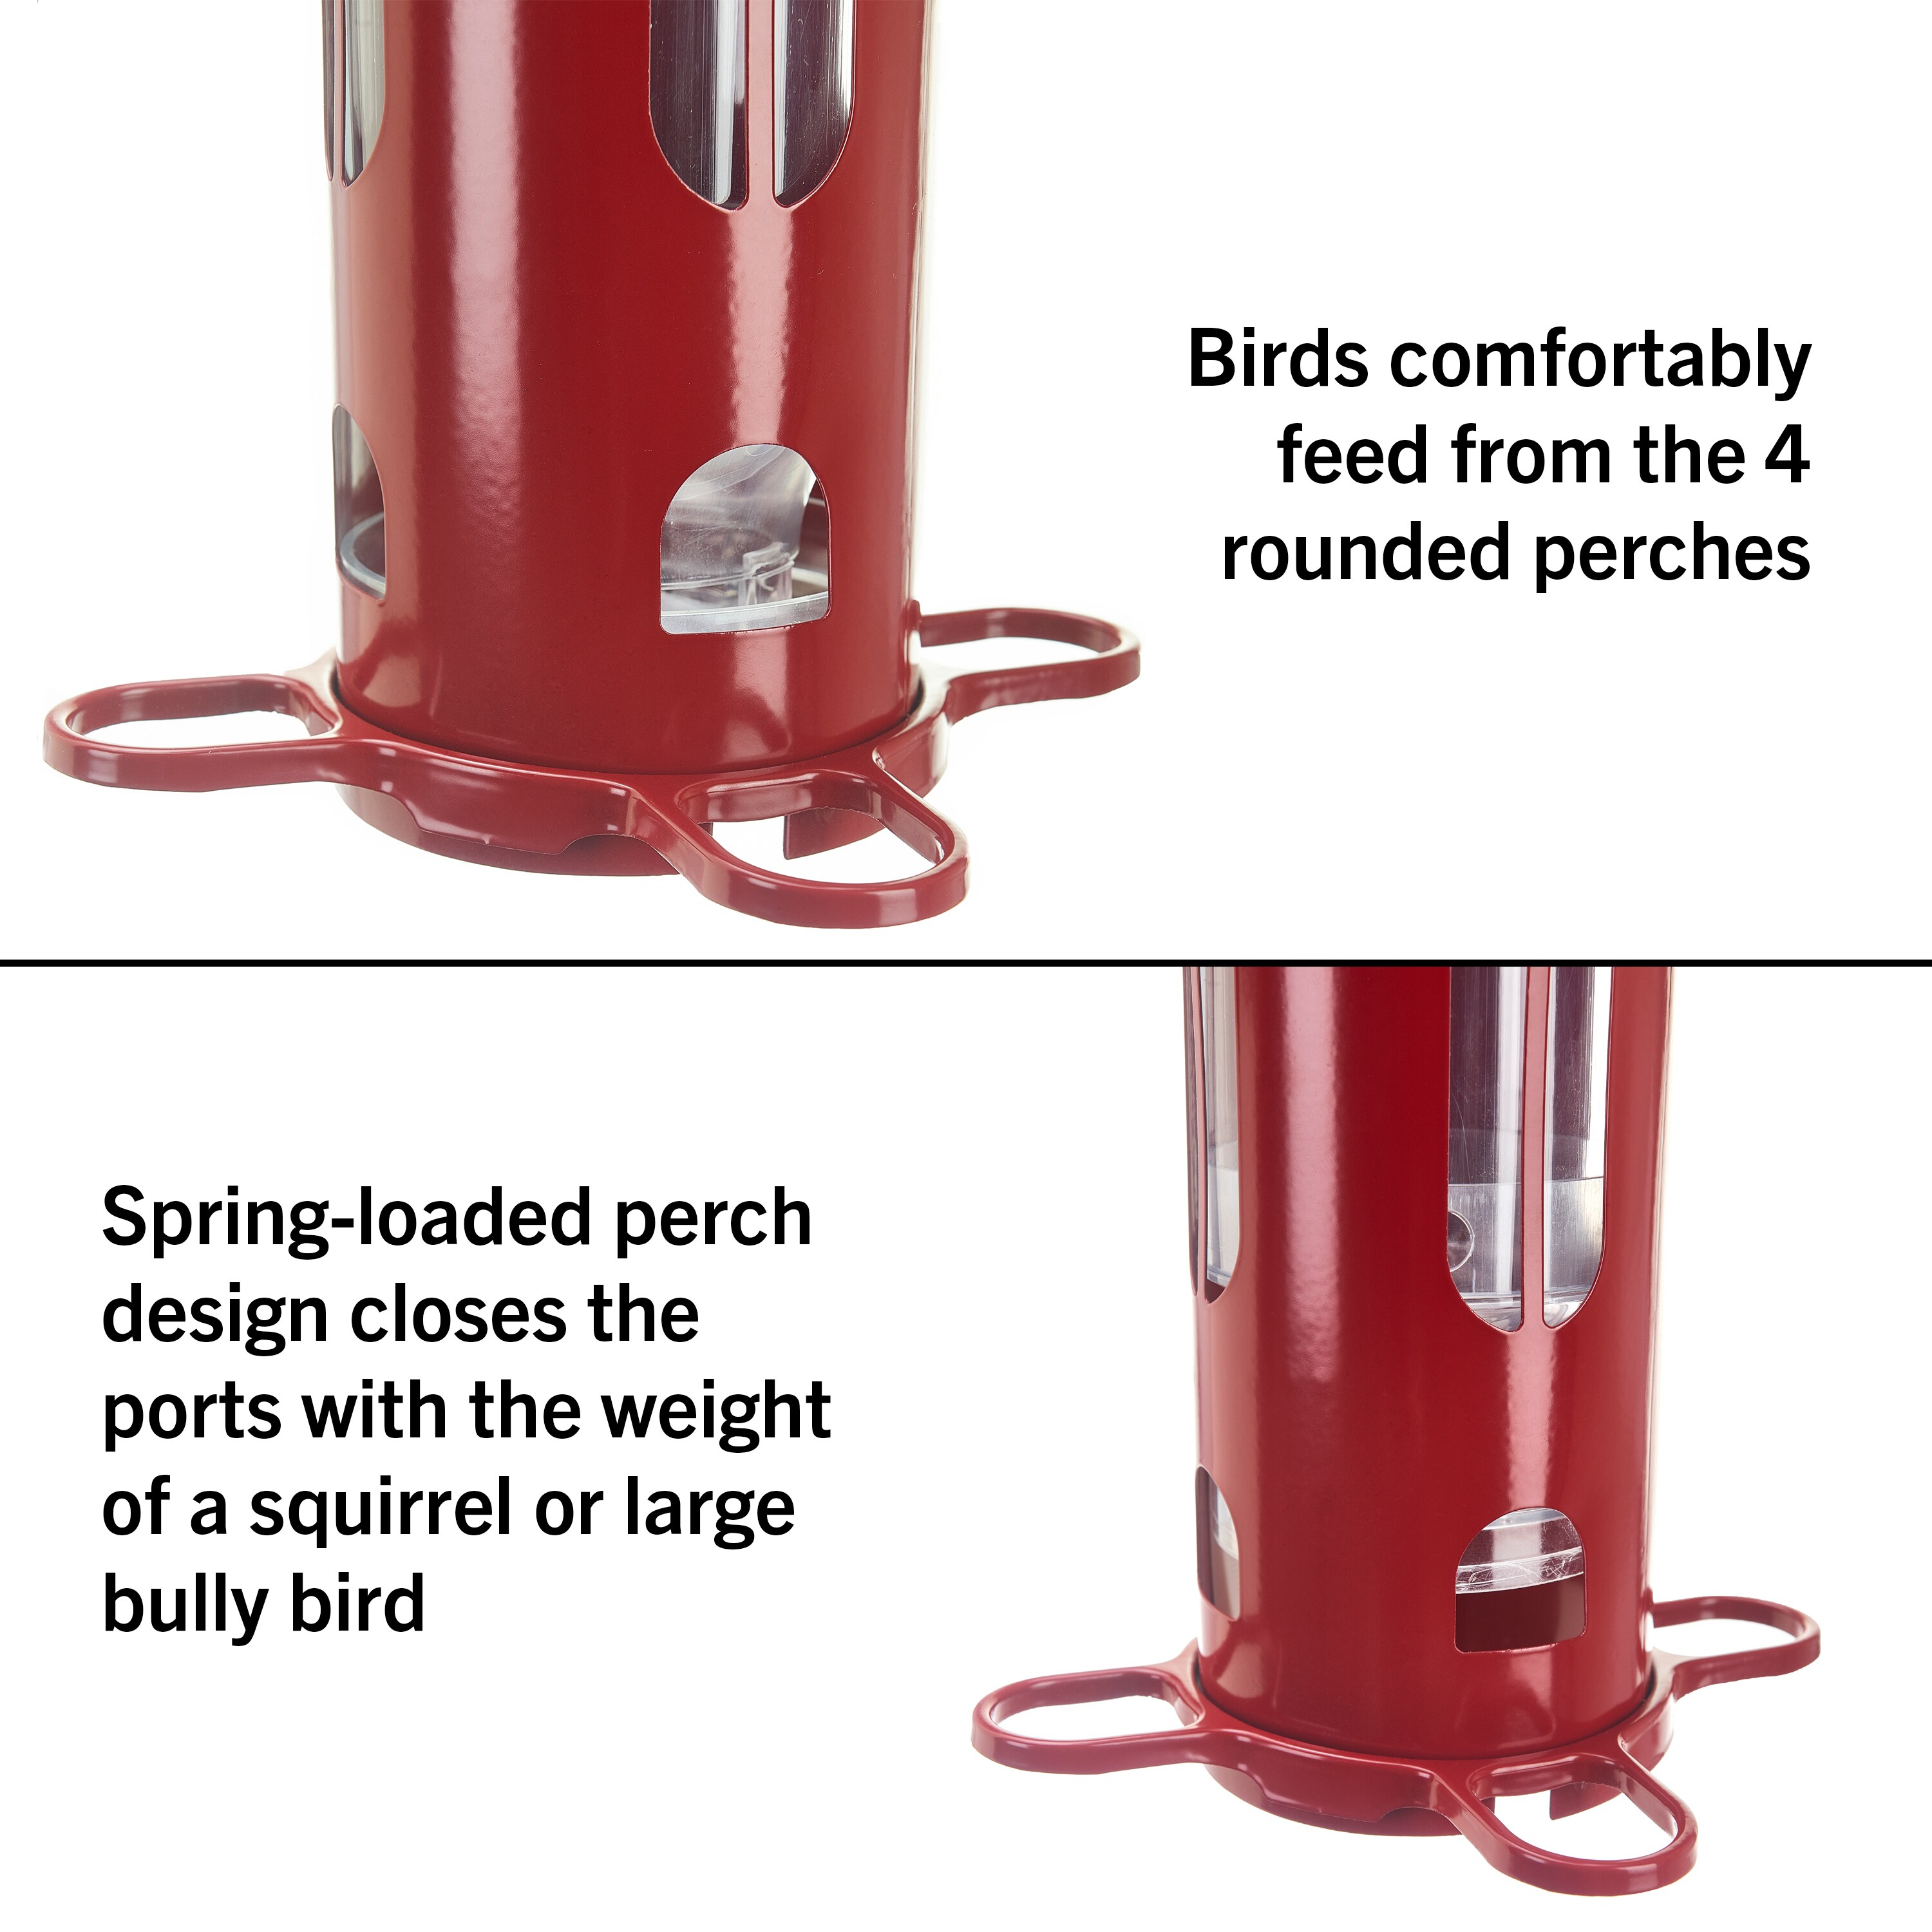 Squirrel-X X1 Squirrel-Resistant Bird Feeder with Spring-Loaded Perches -  4.2 lb